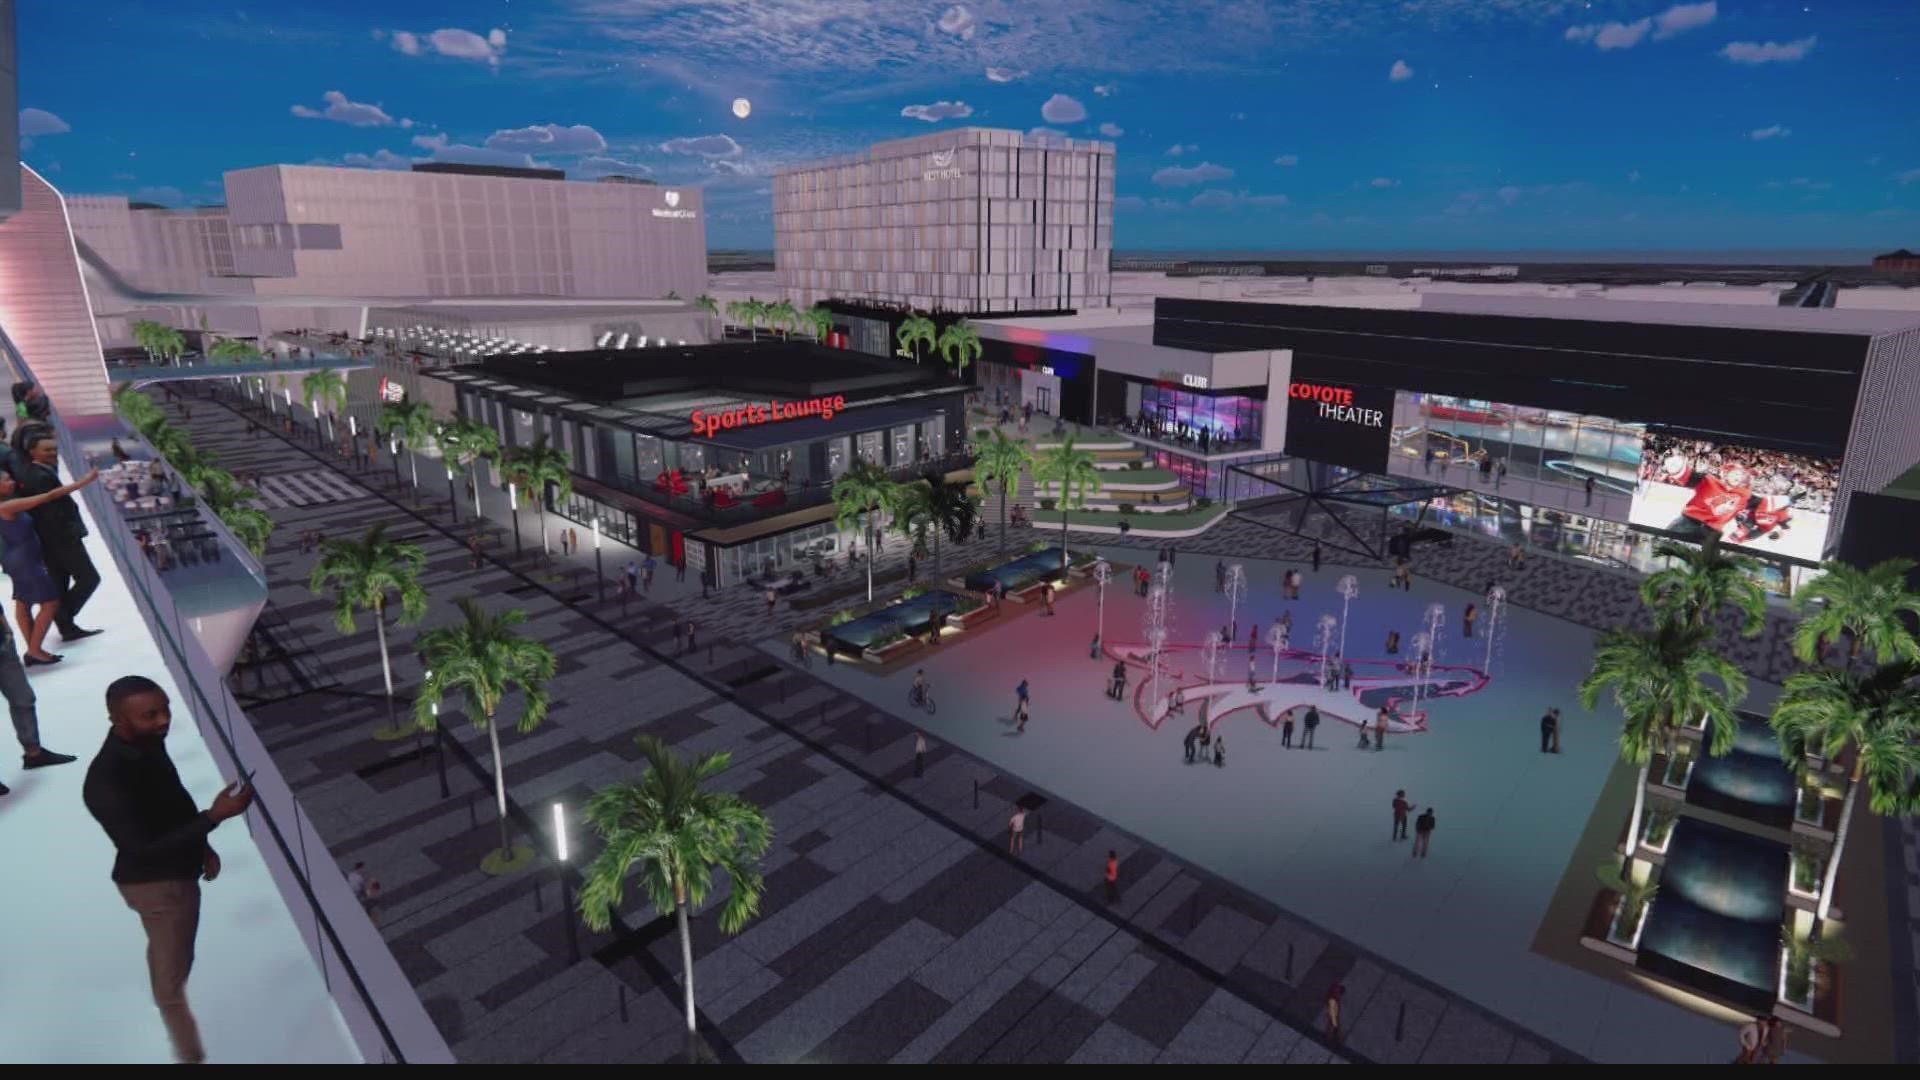 The Tempe Council has voted to continue negotiations with the Coyotes on the proposed arena.